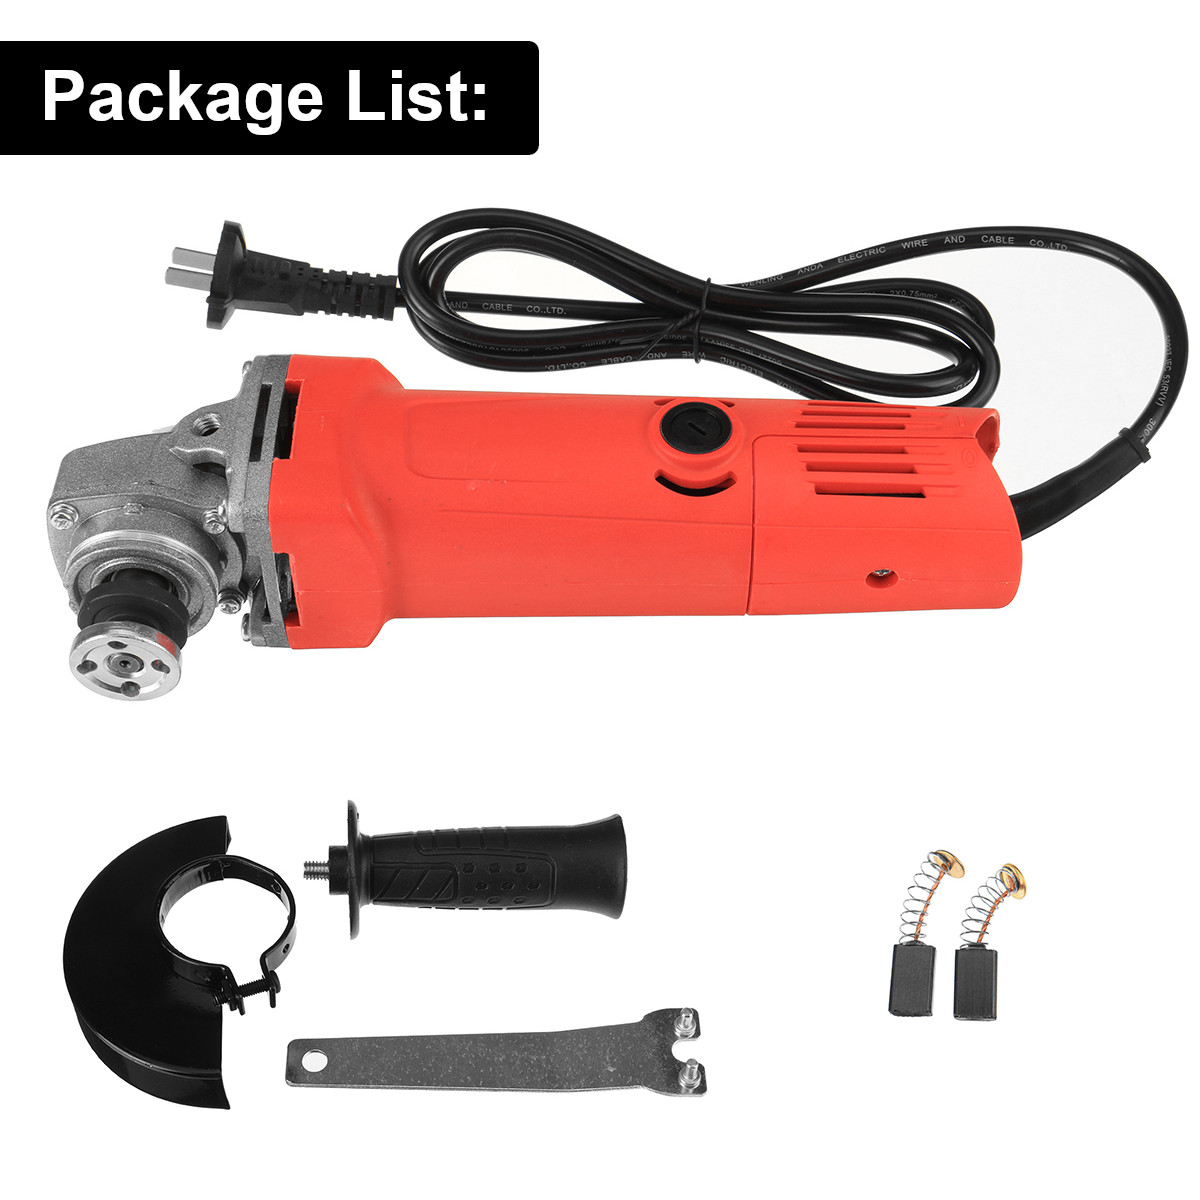 850W-100mm-11000rpm-Electric-Angle-Grinder-Cutting-Machine-Handheld-Polishing-Grinding-Carving-Tool-1736781-8